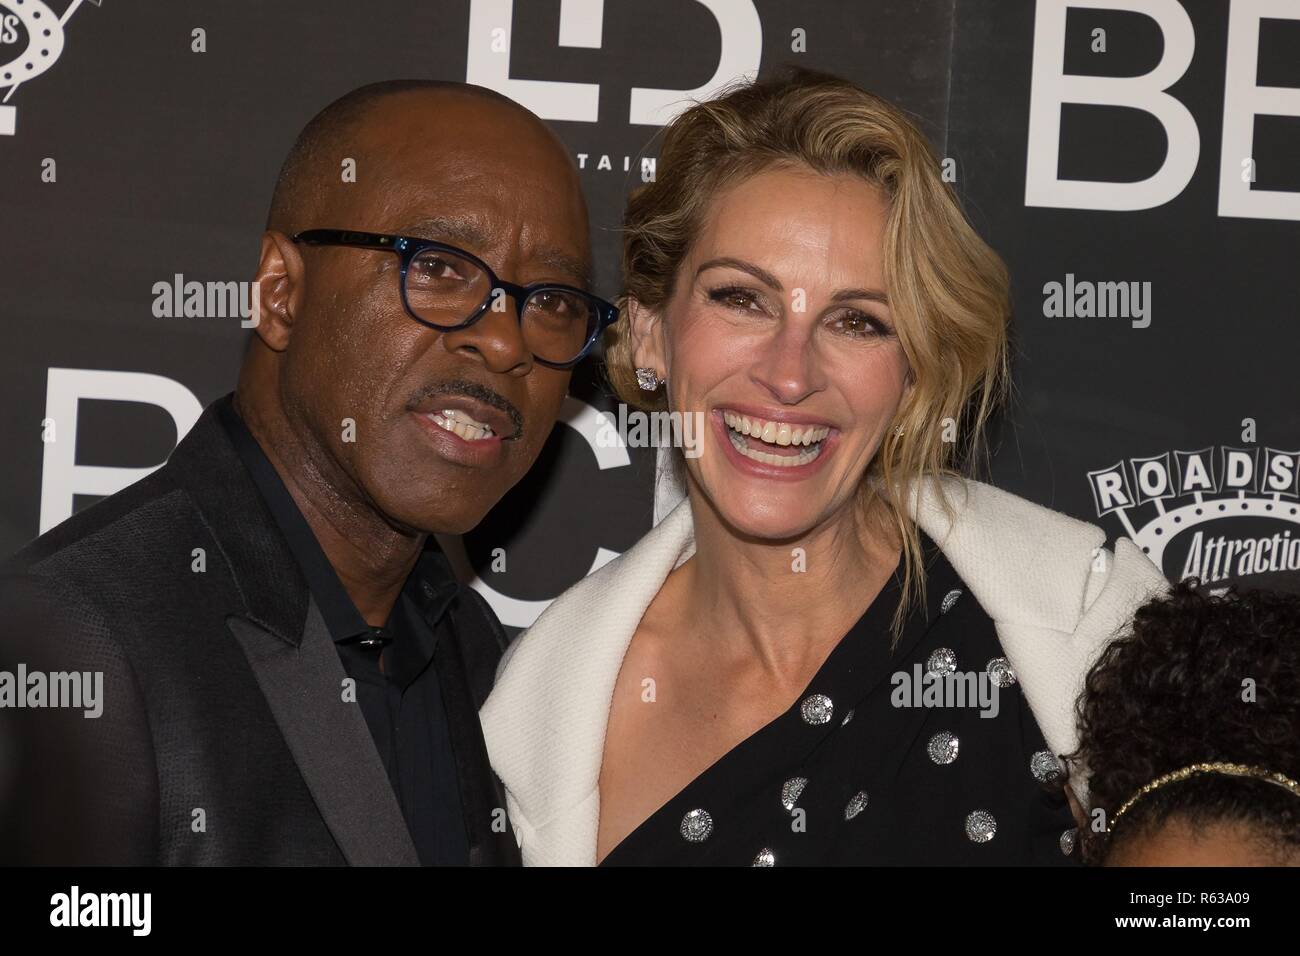 New York, NY, USA. 3rd Dec, 2018. Courtney B. Vance, Julia Roberts at arrivals for BEN IS BACK Premiere, AMC Loews Lincoln Square 13, New York, NY December 3, 2018. Credit: Jason Smith/Everett Collection/Alamy Live News Stock Photo